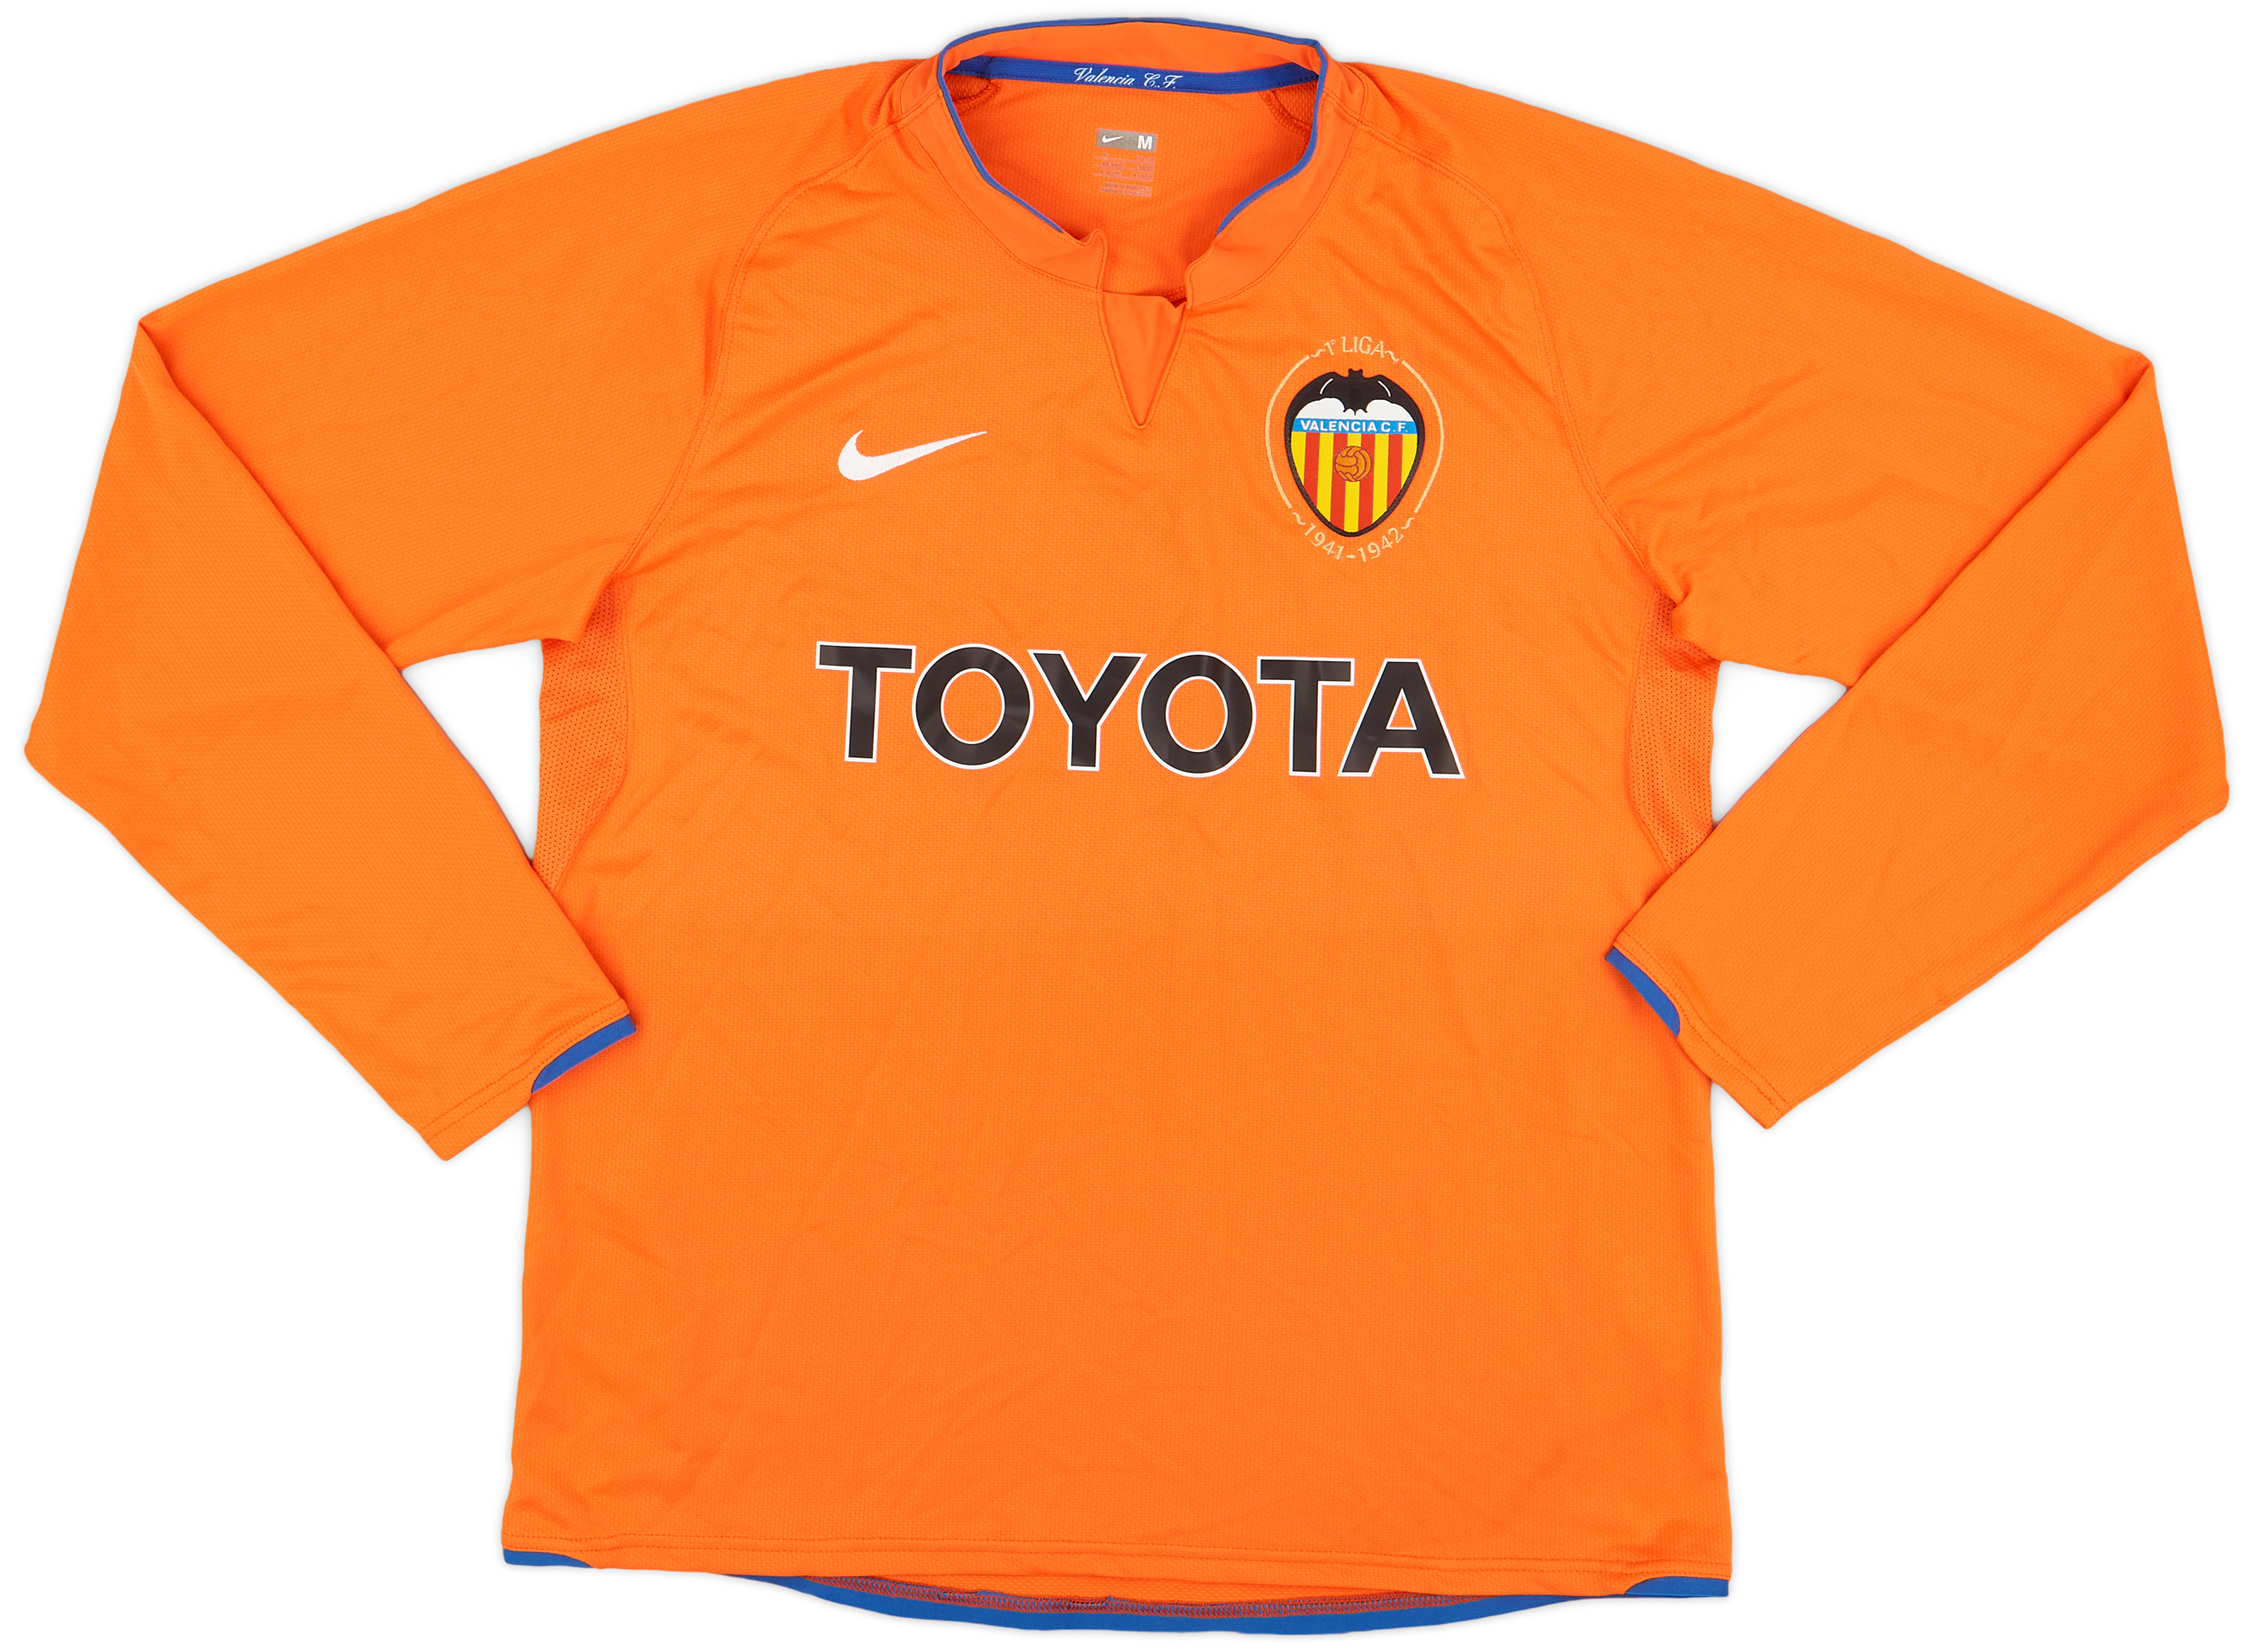 2007-08 Valencia Player Issue Away Shirt - 9/10 - ()